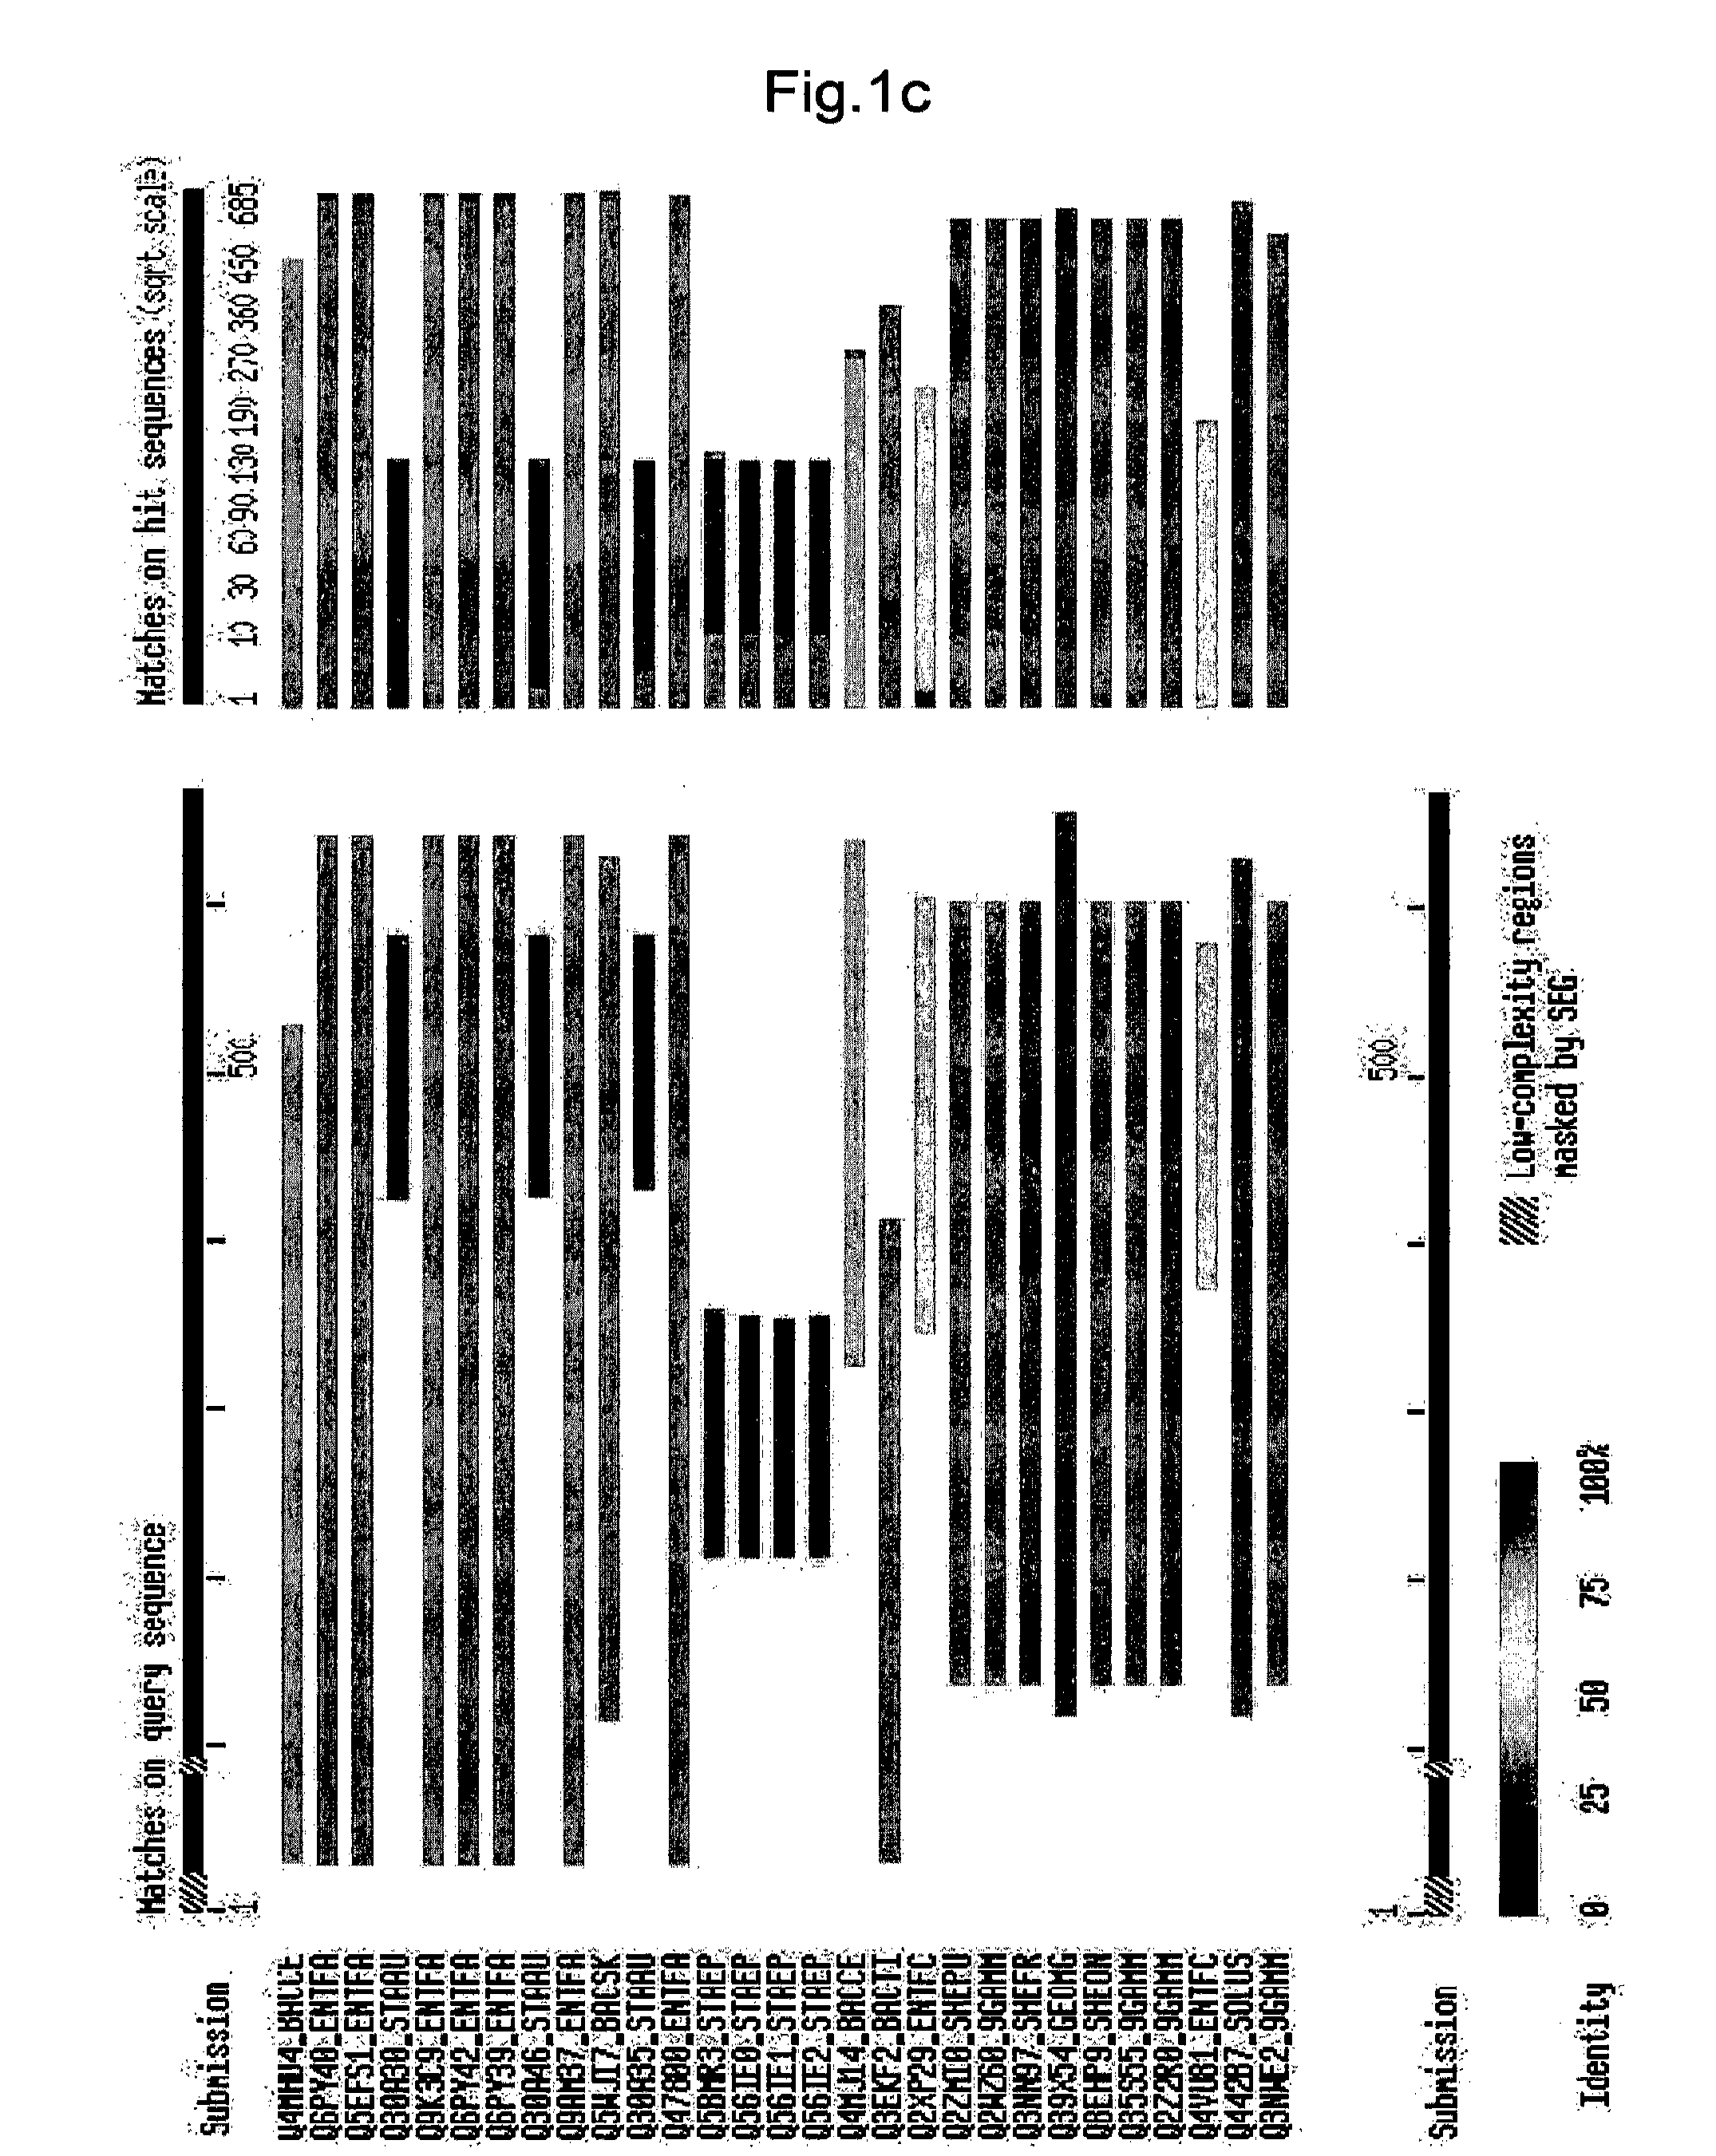 Antibody specific to methicillin resistant staphylococcus aureus, detection method and kit for methicillin resistant staphylococcus aureus using the same